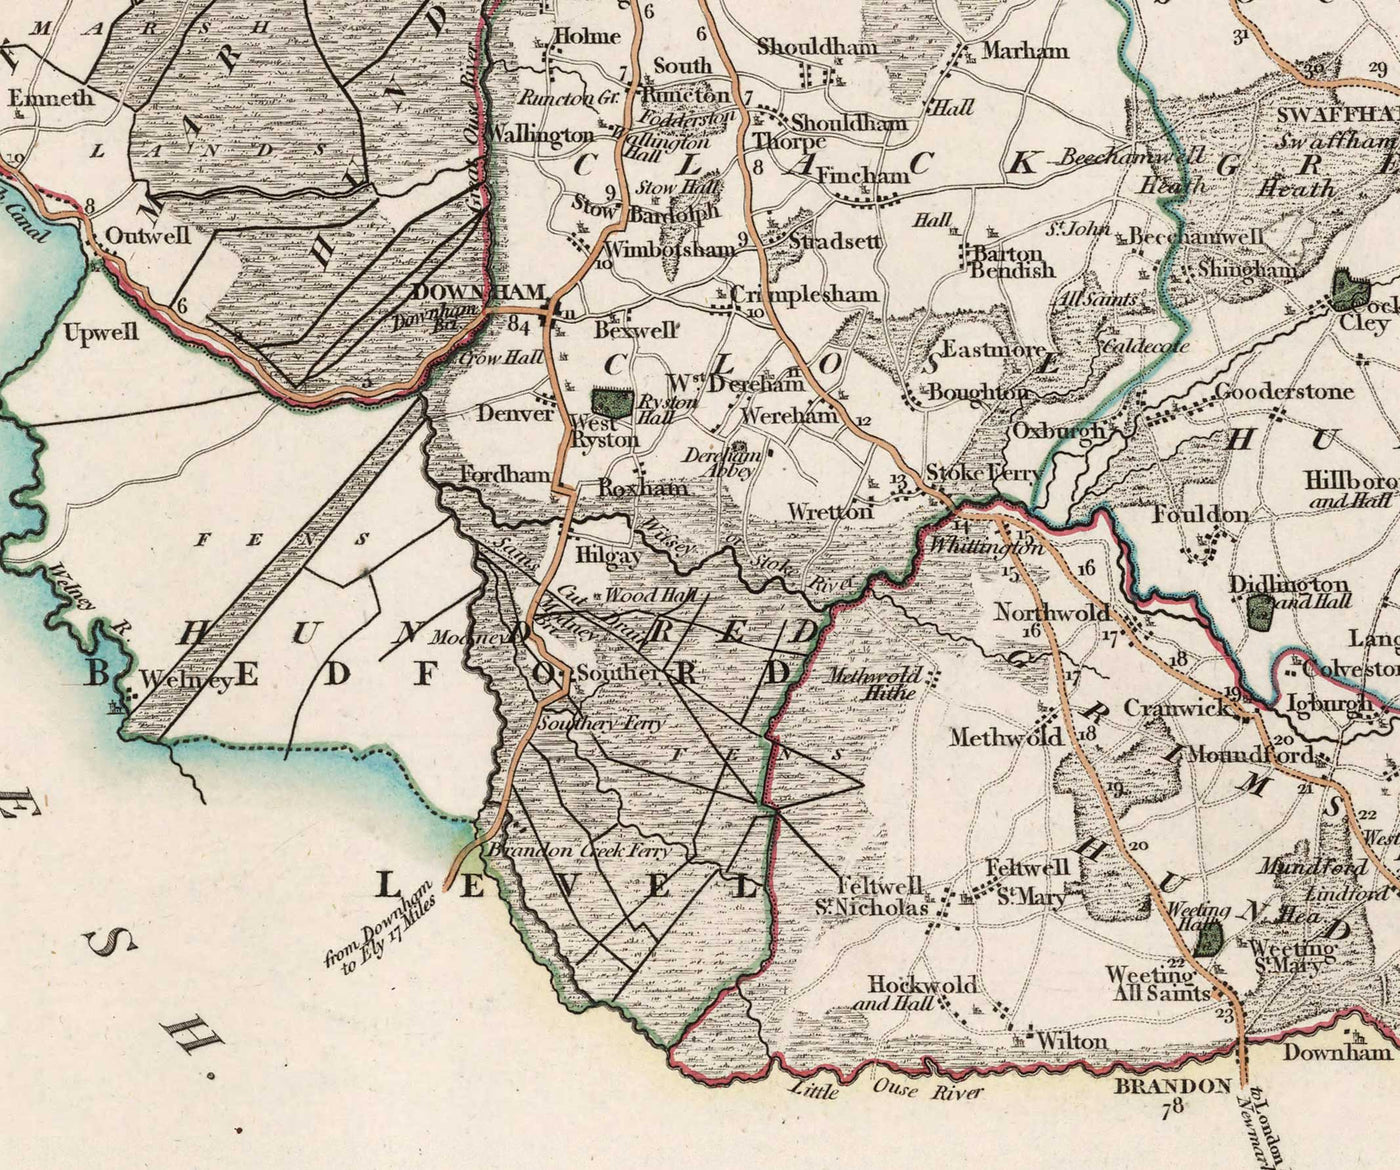 Old Map of Norfolk in 1807 by John Cary - Norwich, Cromer, Great Yarmouth, Thetford, King's Lynn